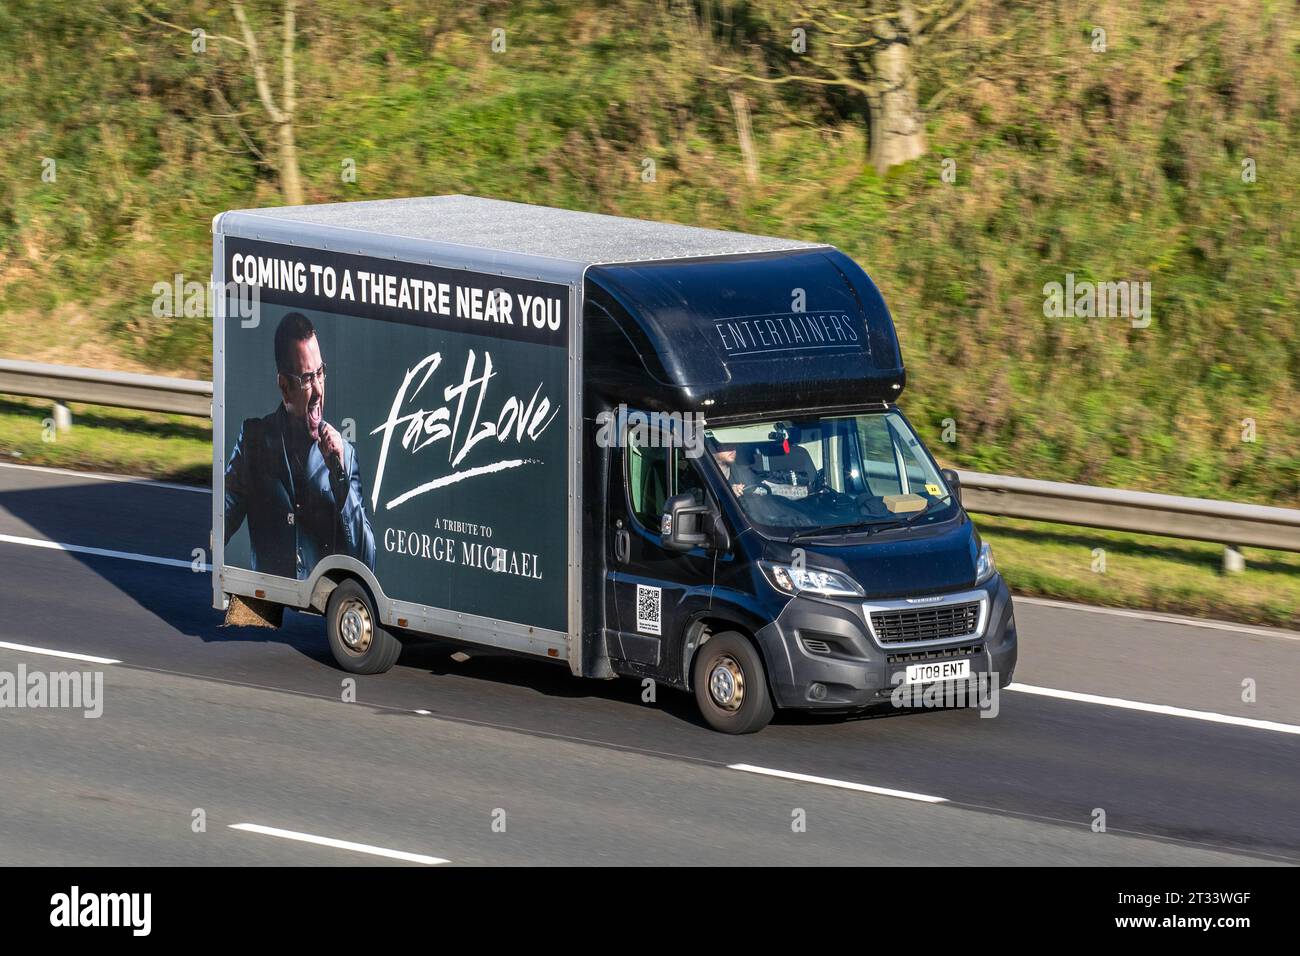 'Fast Love' A tribute to George Michael Entertainment advertising on 2-10 Peugeot Boxer 335 Pro L3h2 Blue Hdi Bluehdi 130 L3H2 LWB LCV Medium Roof Panel Van Diesel 1997 cc; travelling at speed on the M6 motorway in Greater Manchester, UK Stock Photo